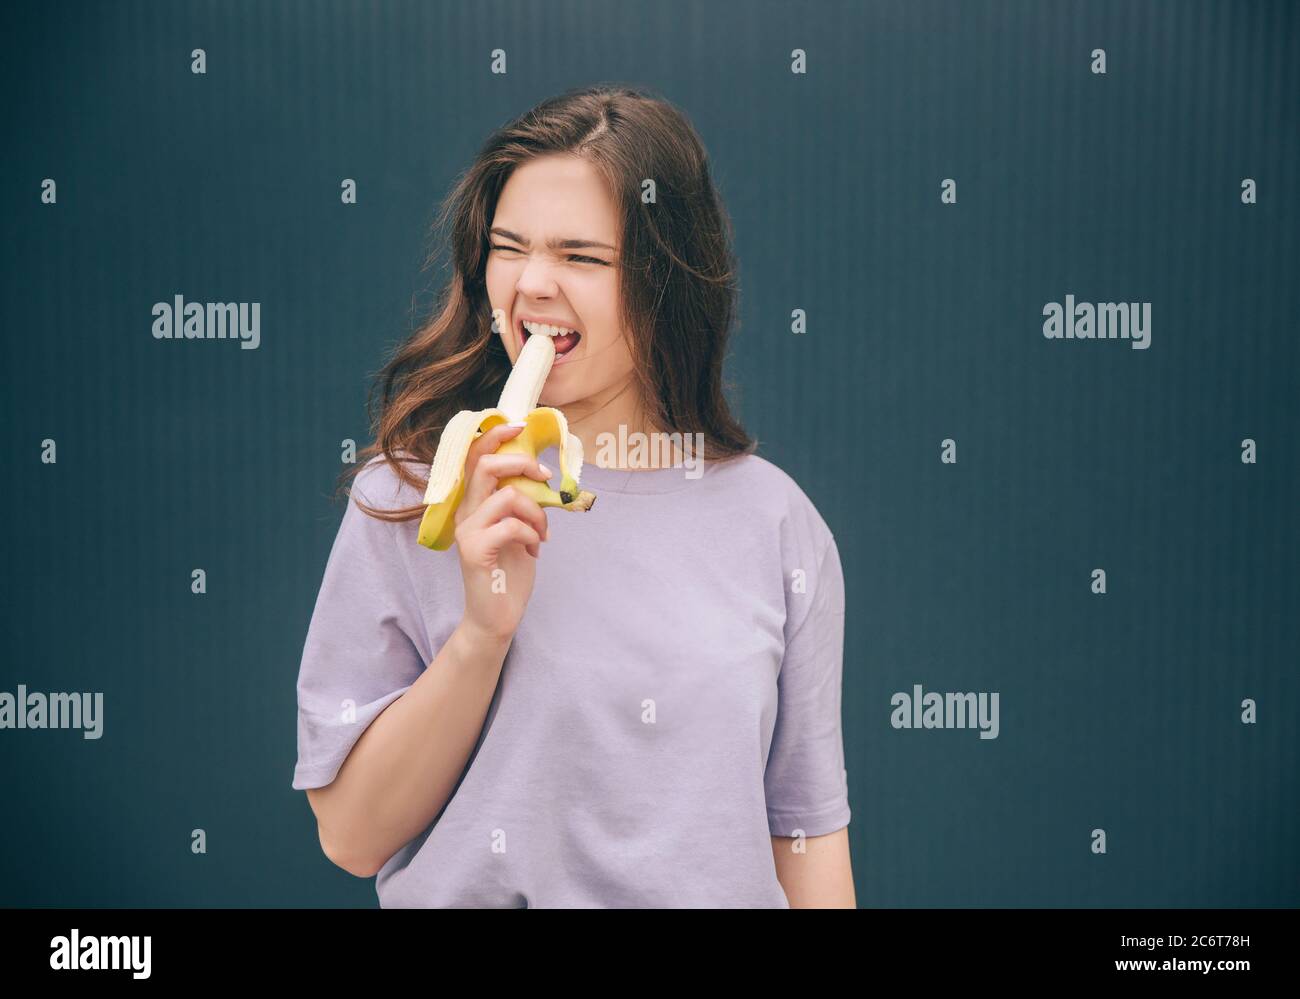 Young stylish trendy woman isolated over grey blue background. Girl biting piece of yellow ripe banana and doing weird facial expression. Stand alone Stock Photo